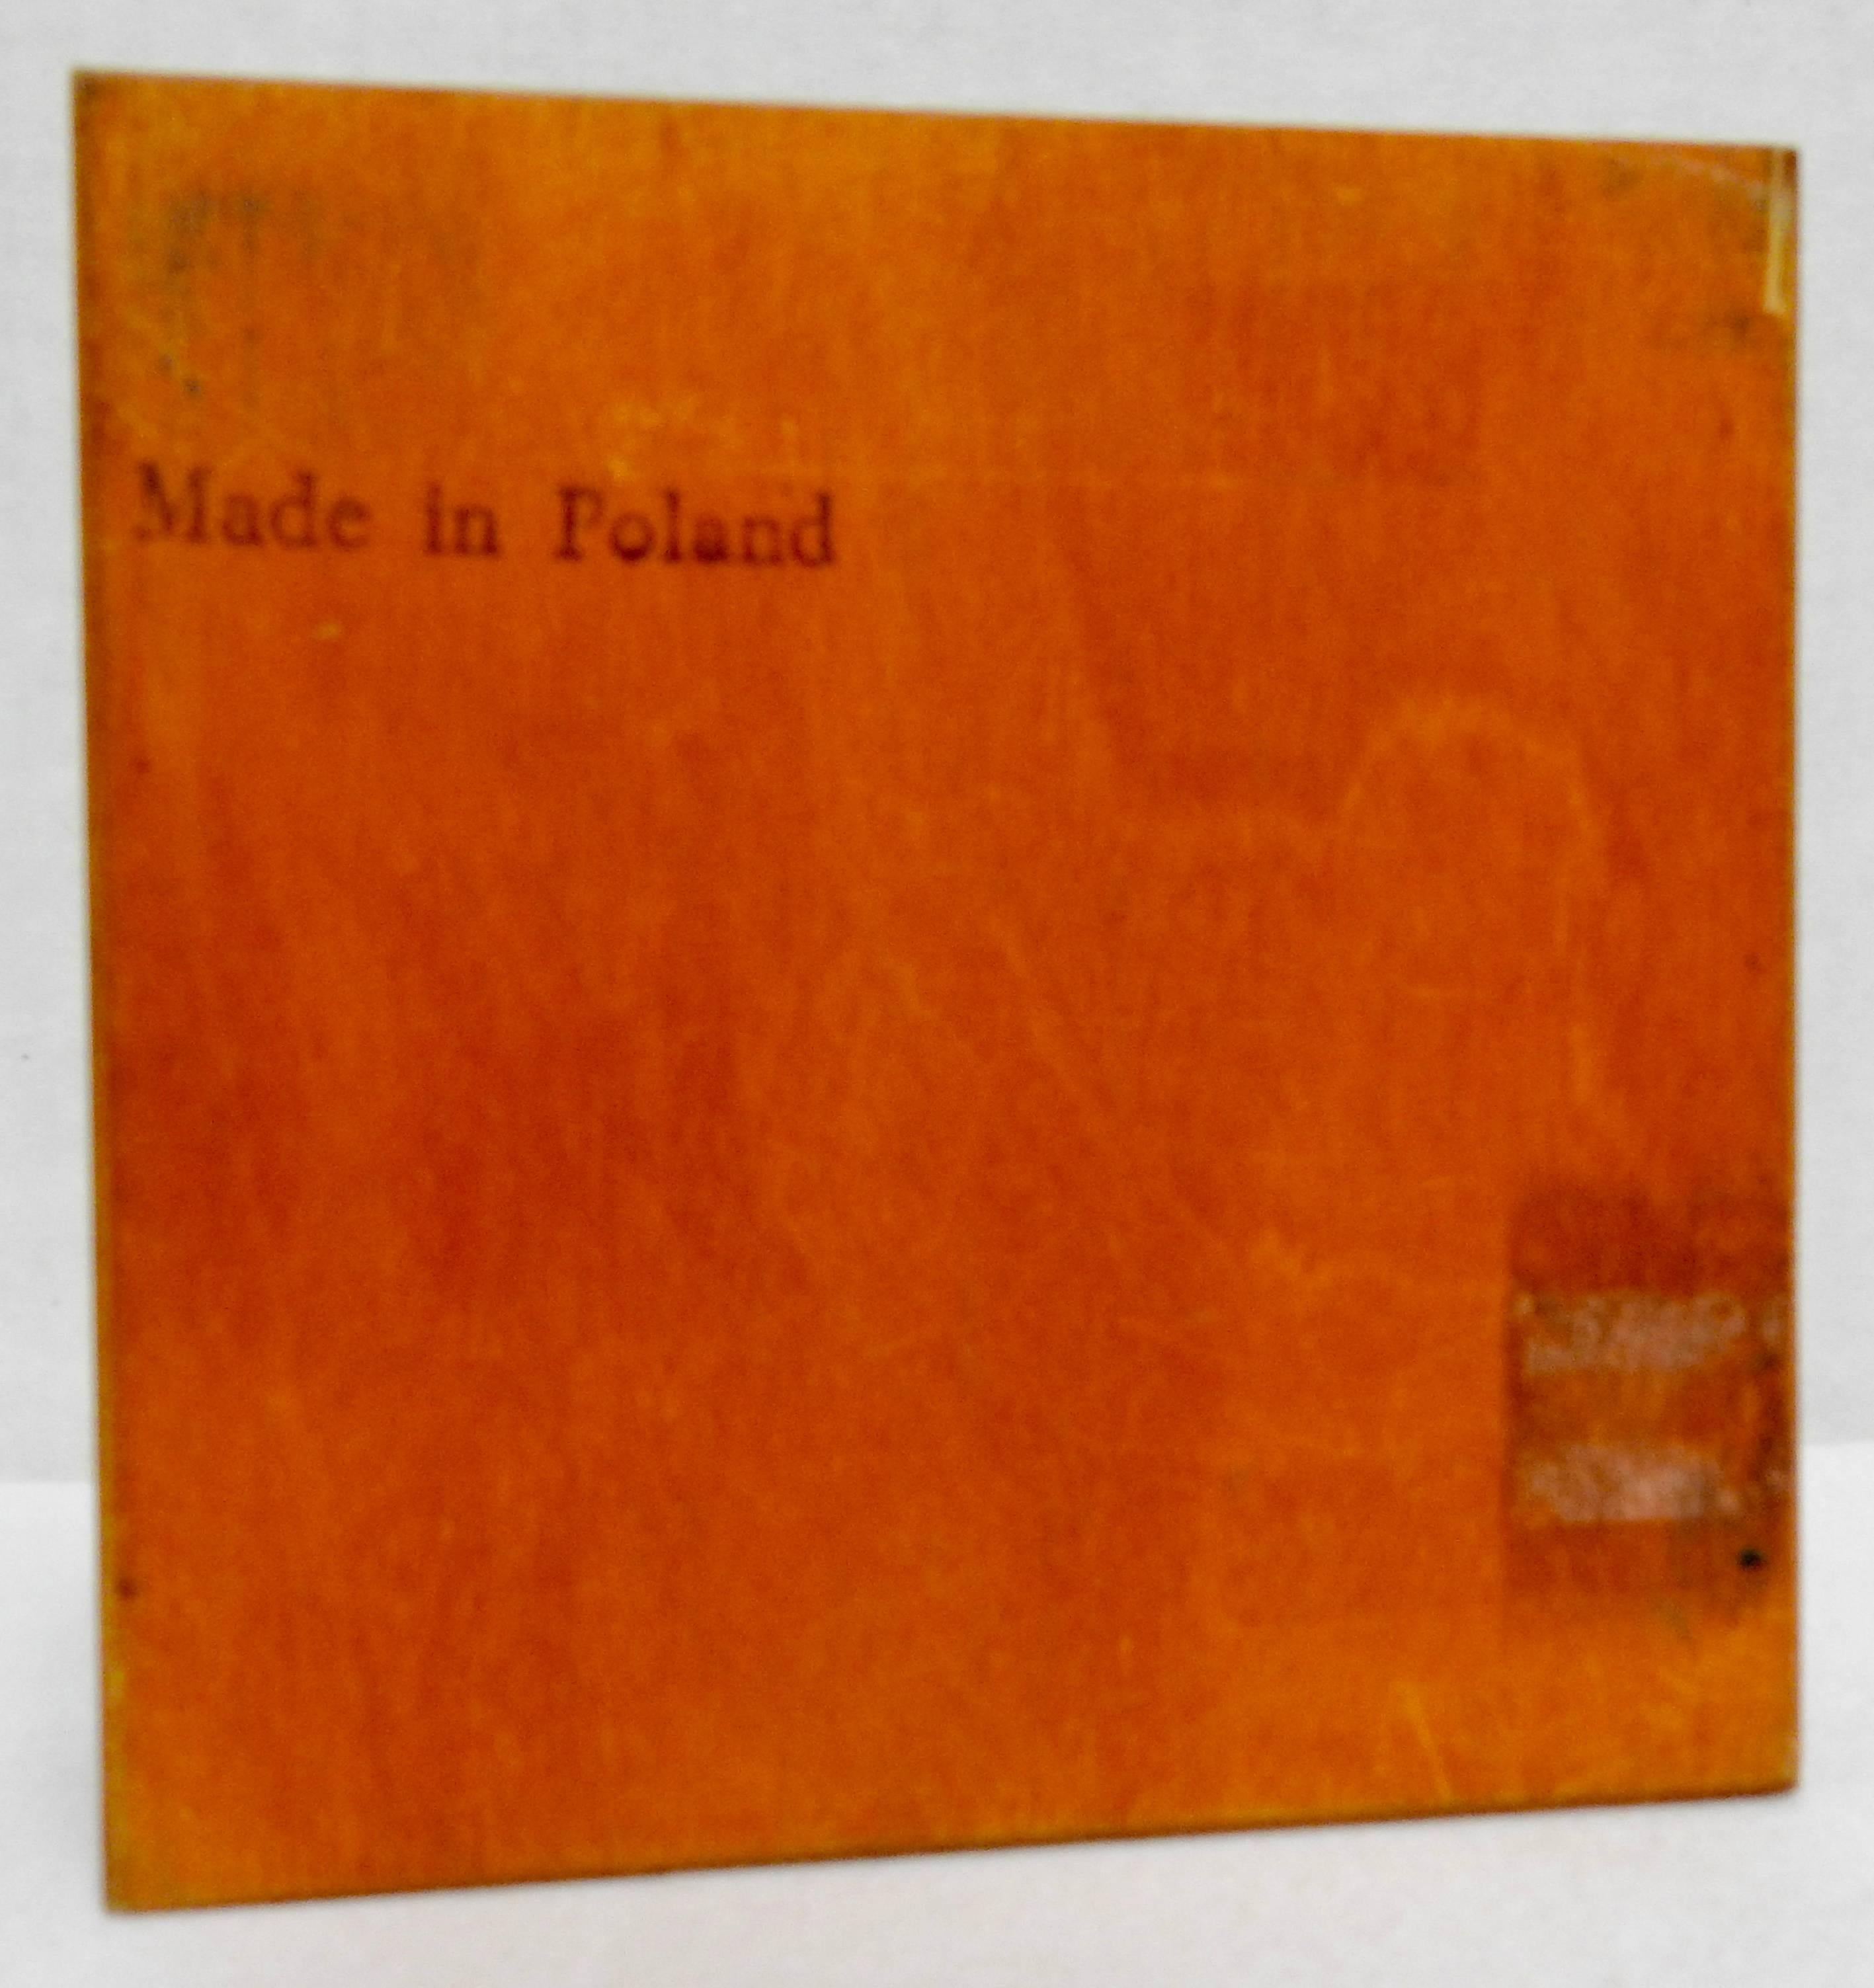 Polish Wooden Box from Poland Hand Carved For Sale